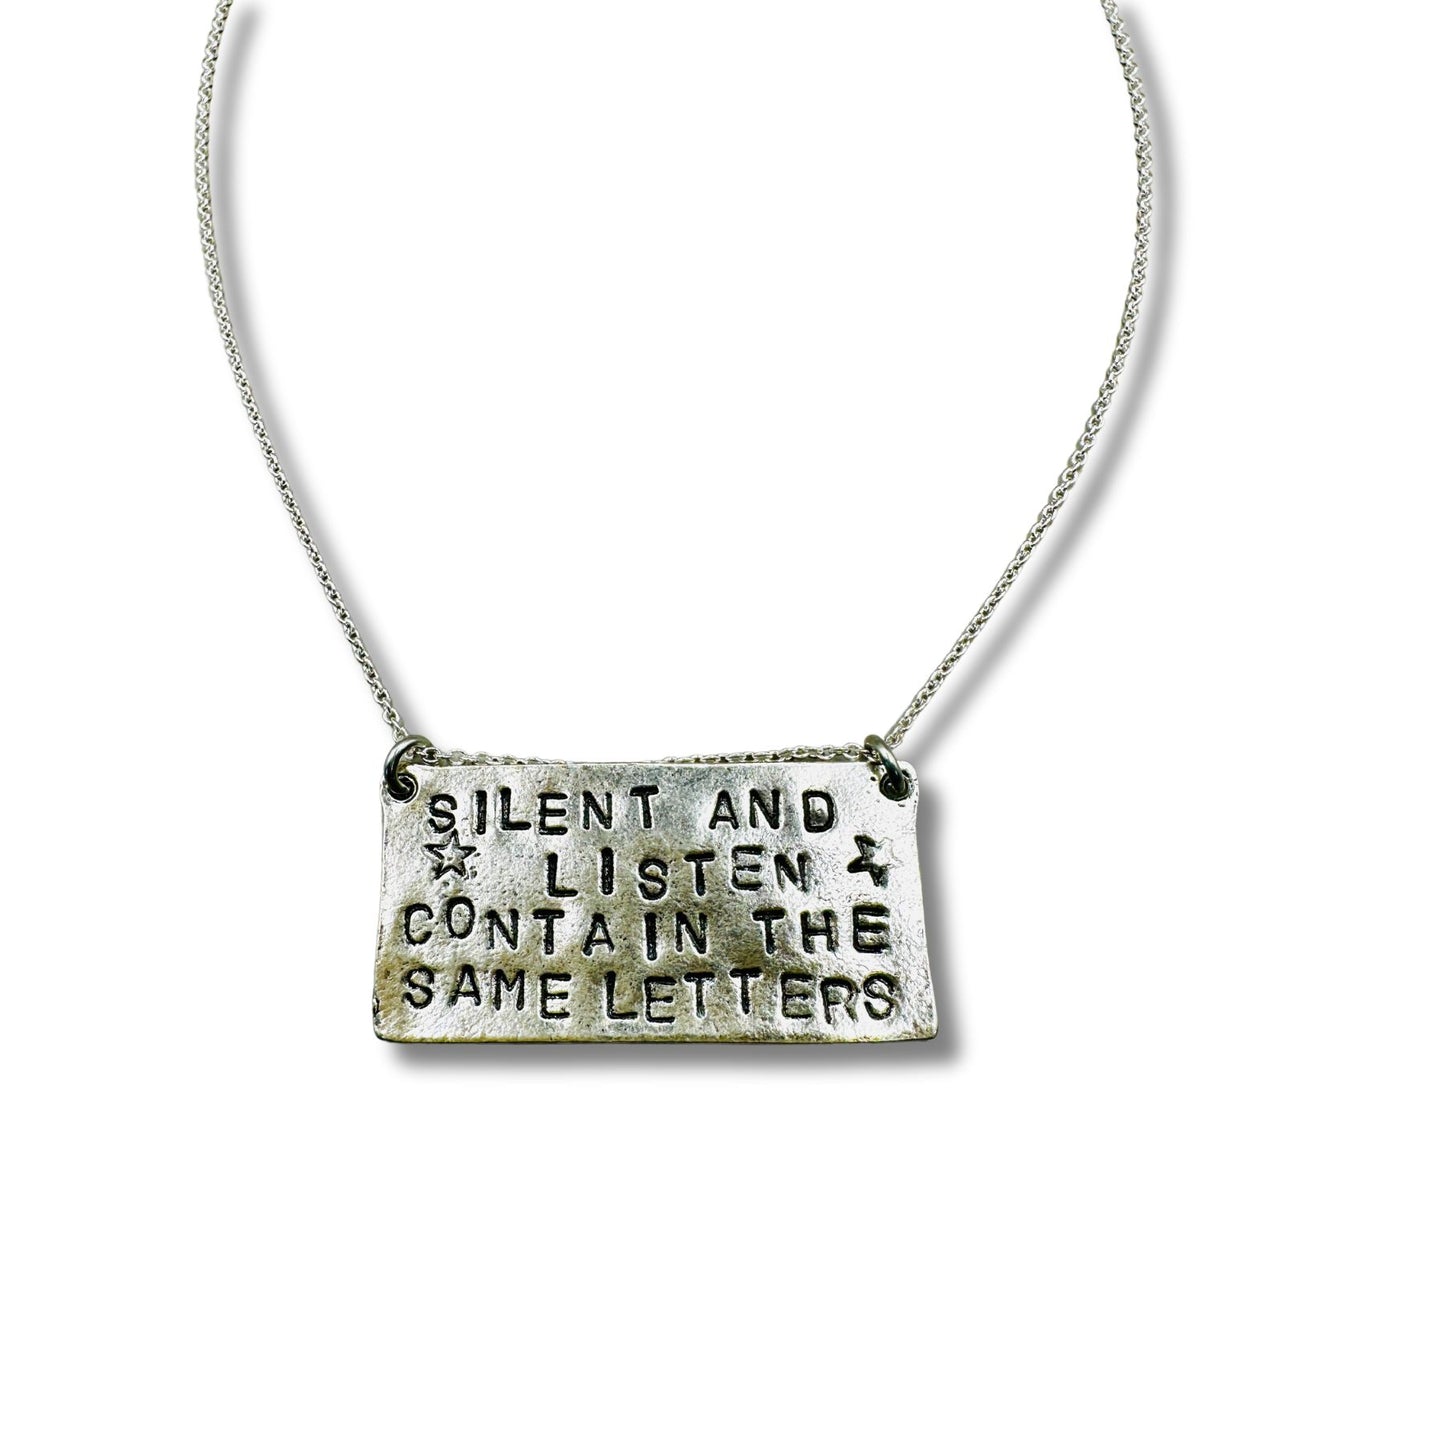 Silent and Listen Contain the Same Letters Hand Stamped Necklace